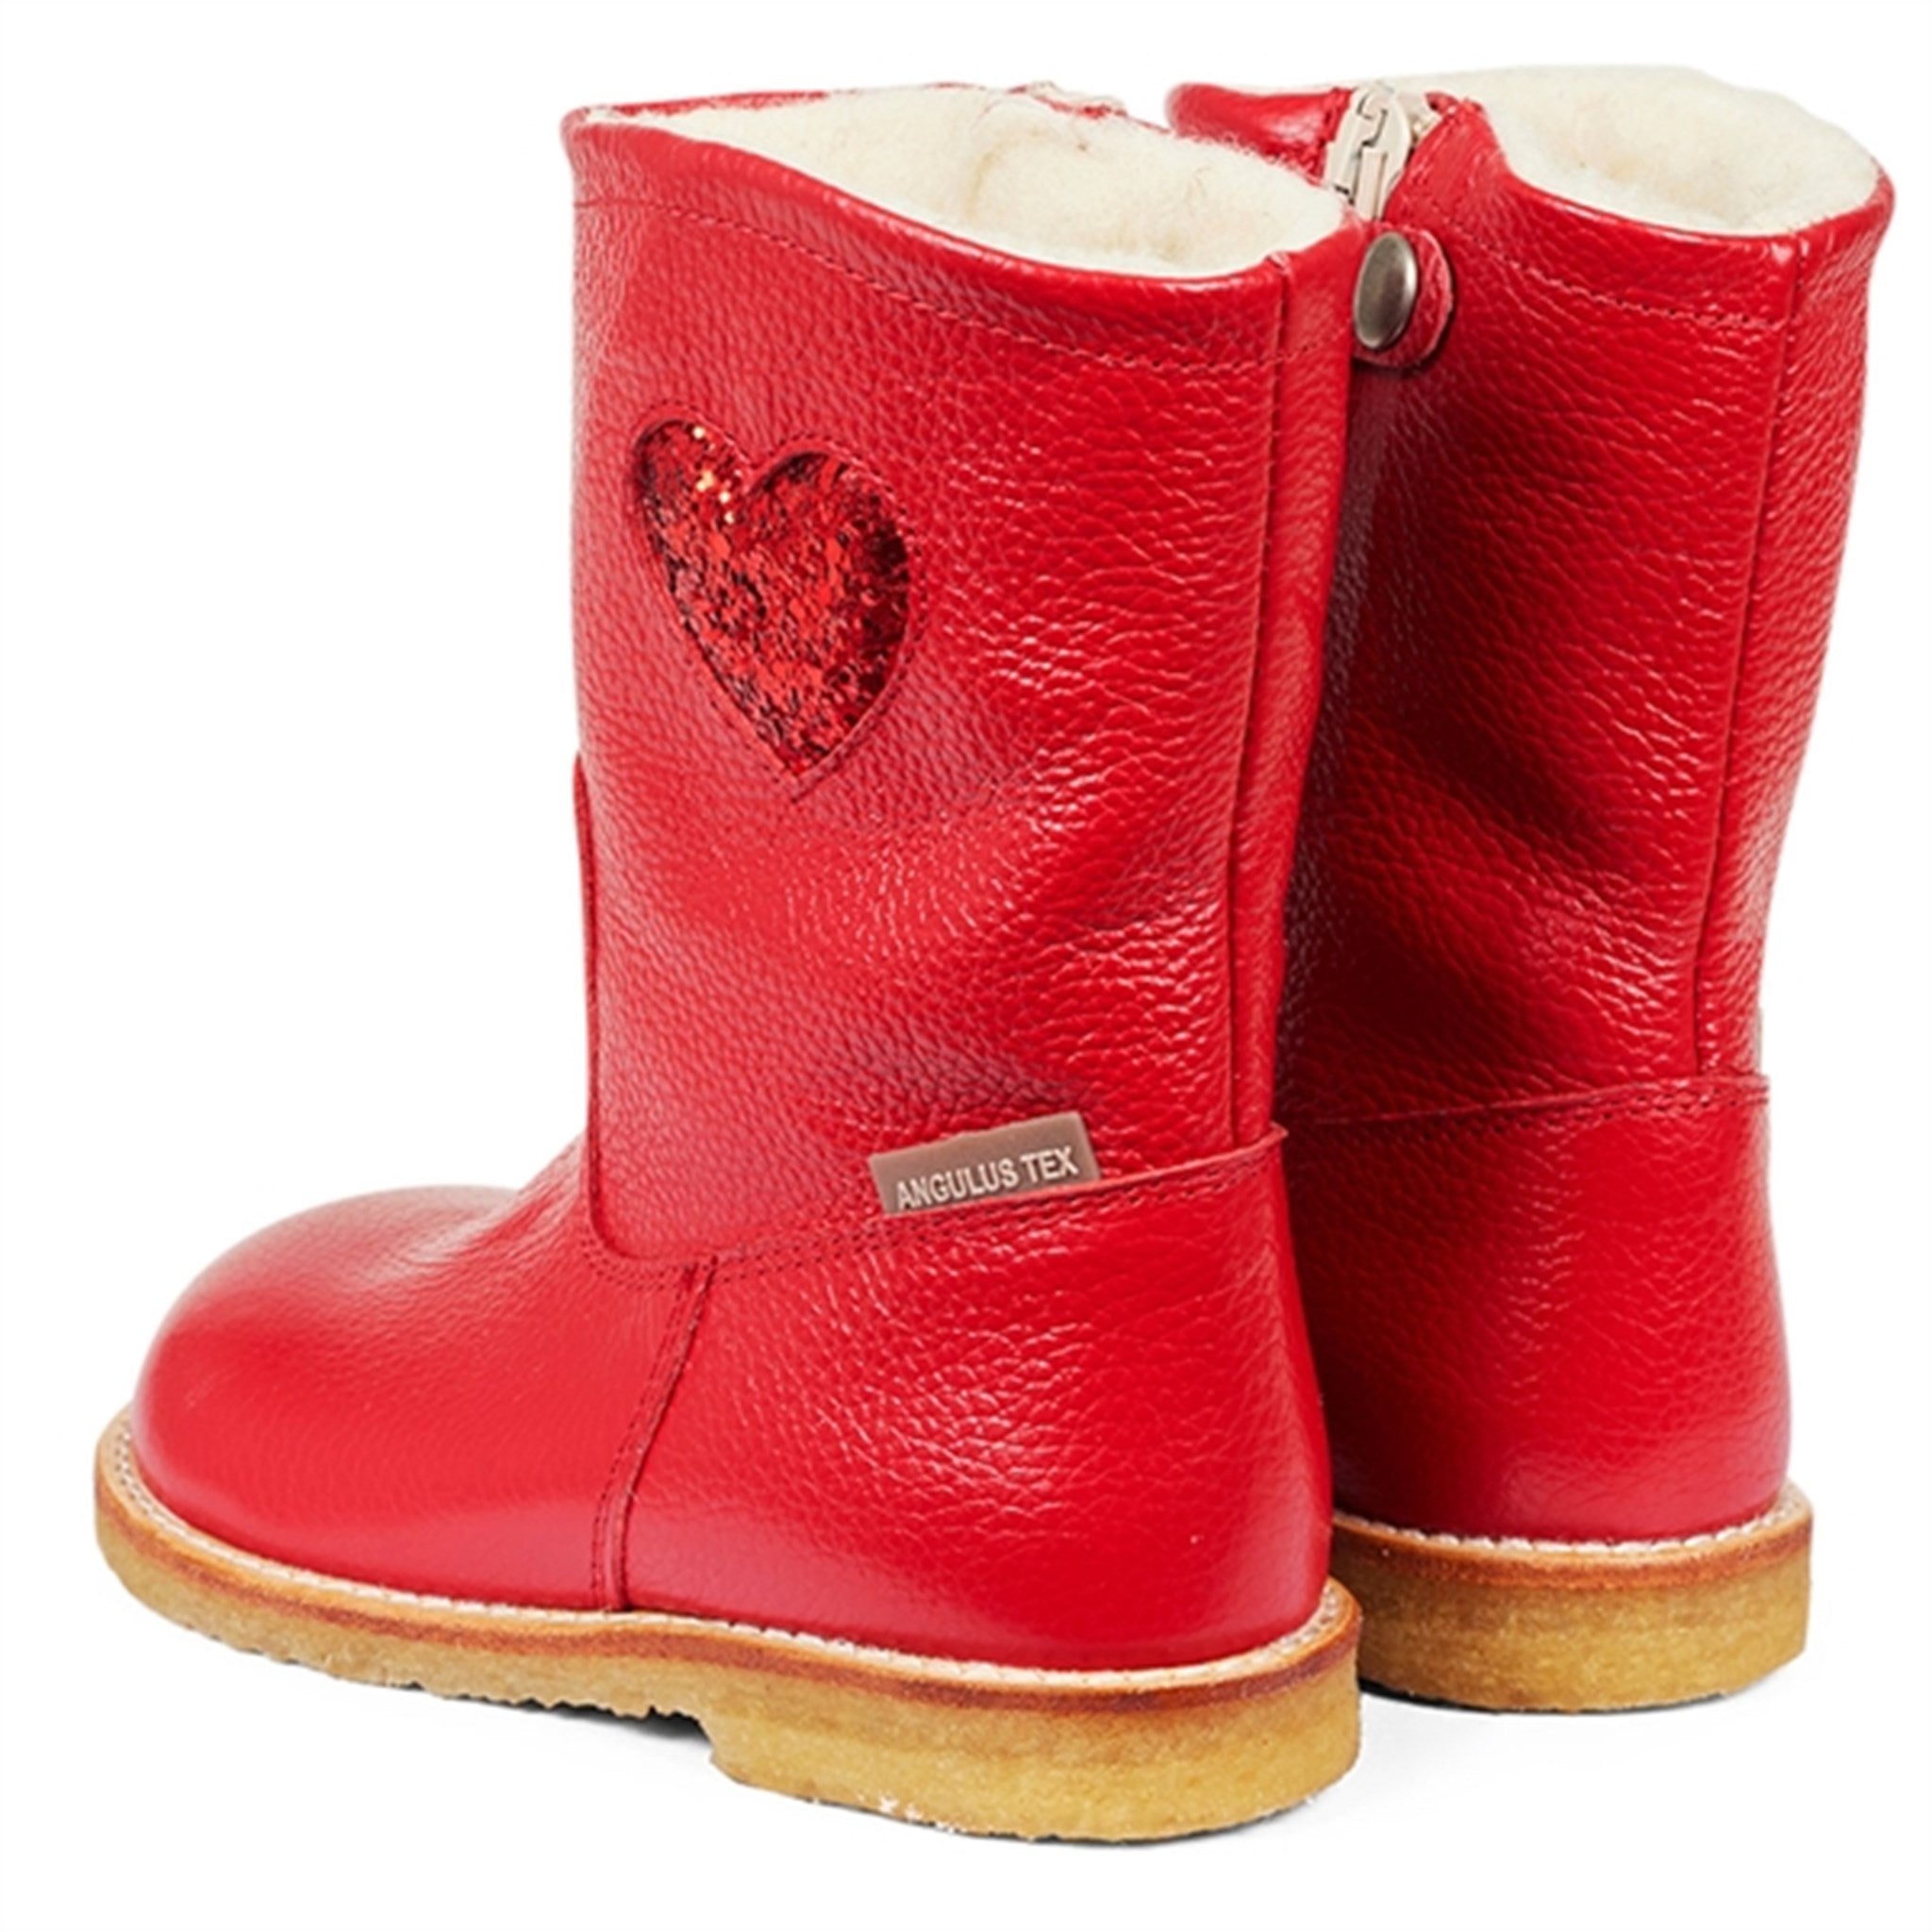 Angulus Tex-Boots With Zipper Red/Red Glitter 7